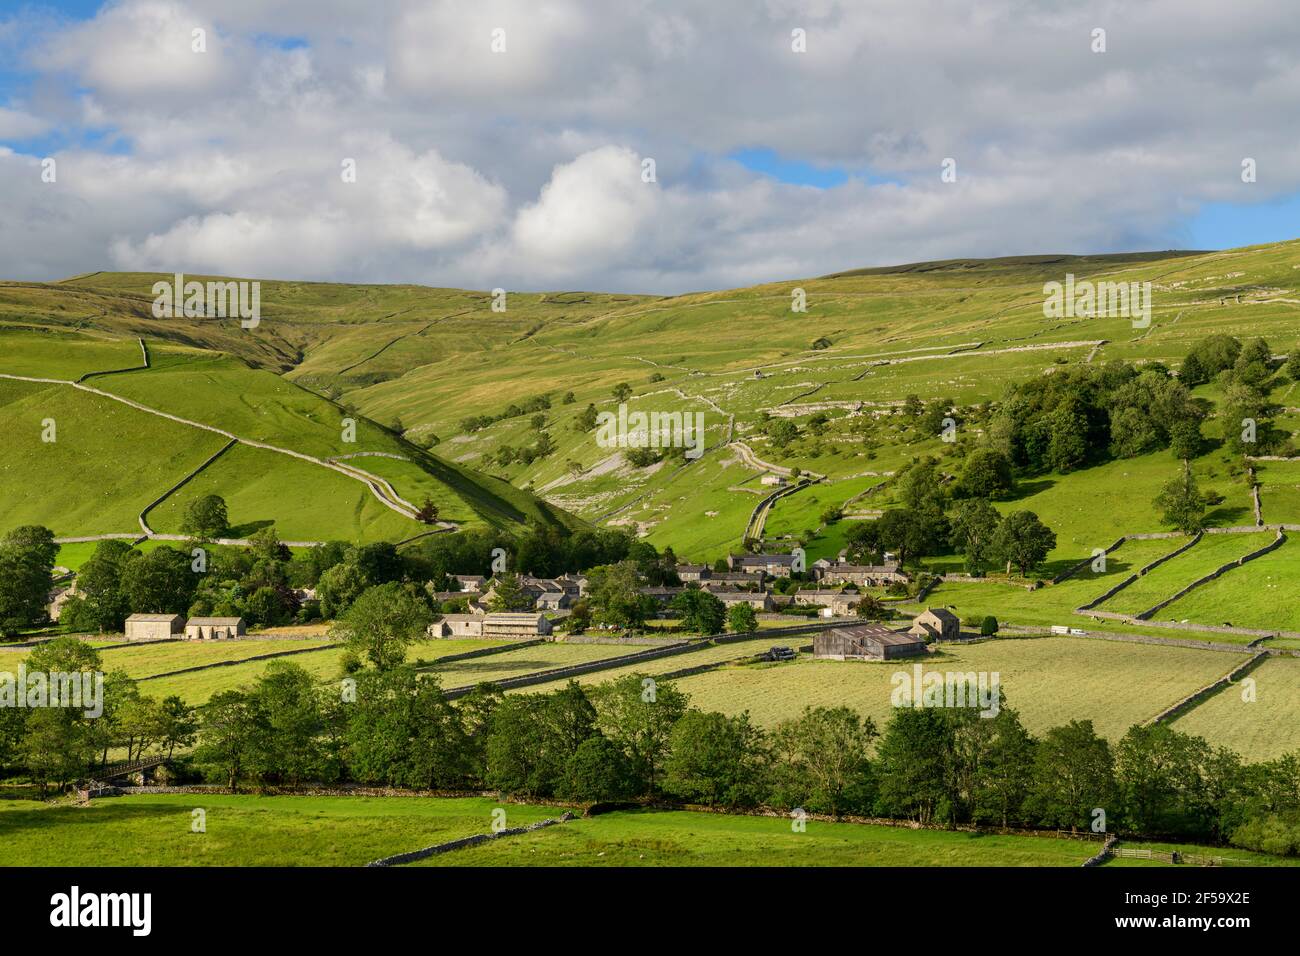 Picturesque Dales village (stone houses) nestling in sunlit valley by fields, hills, hillsides & steep-sided gorge - Starbotton, Yorkshire England UK. Stock Photo